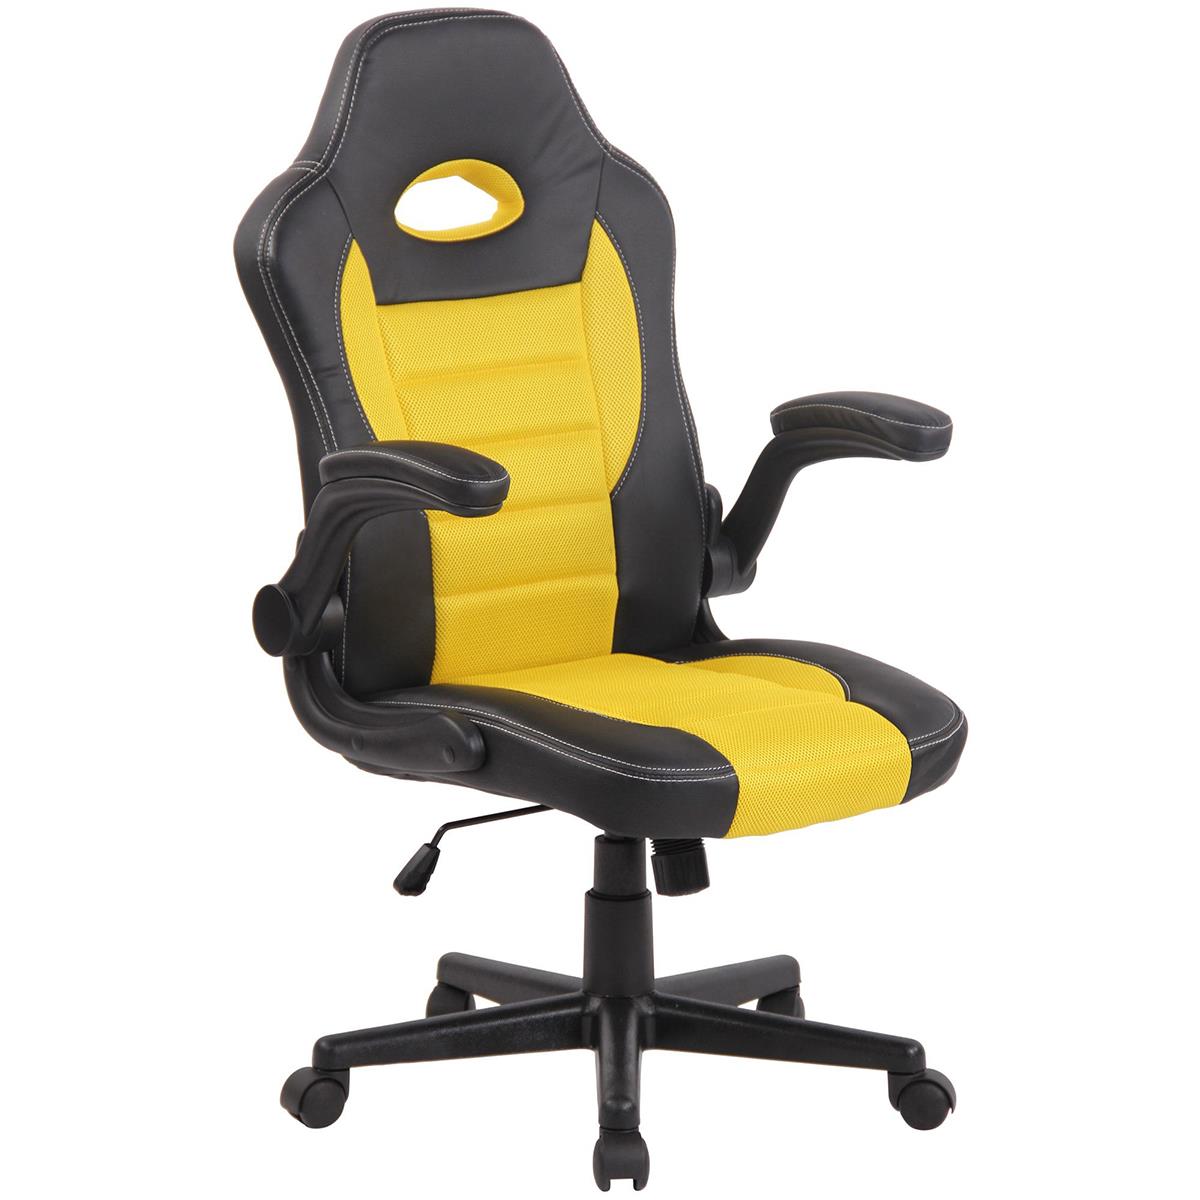 Chaise Gamer LOTUS, accoudoirs relevables, cuir et maille respirable, jaune